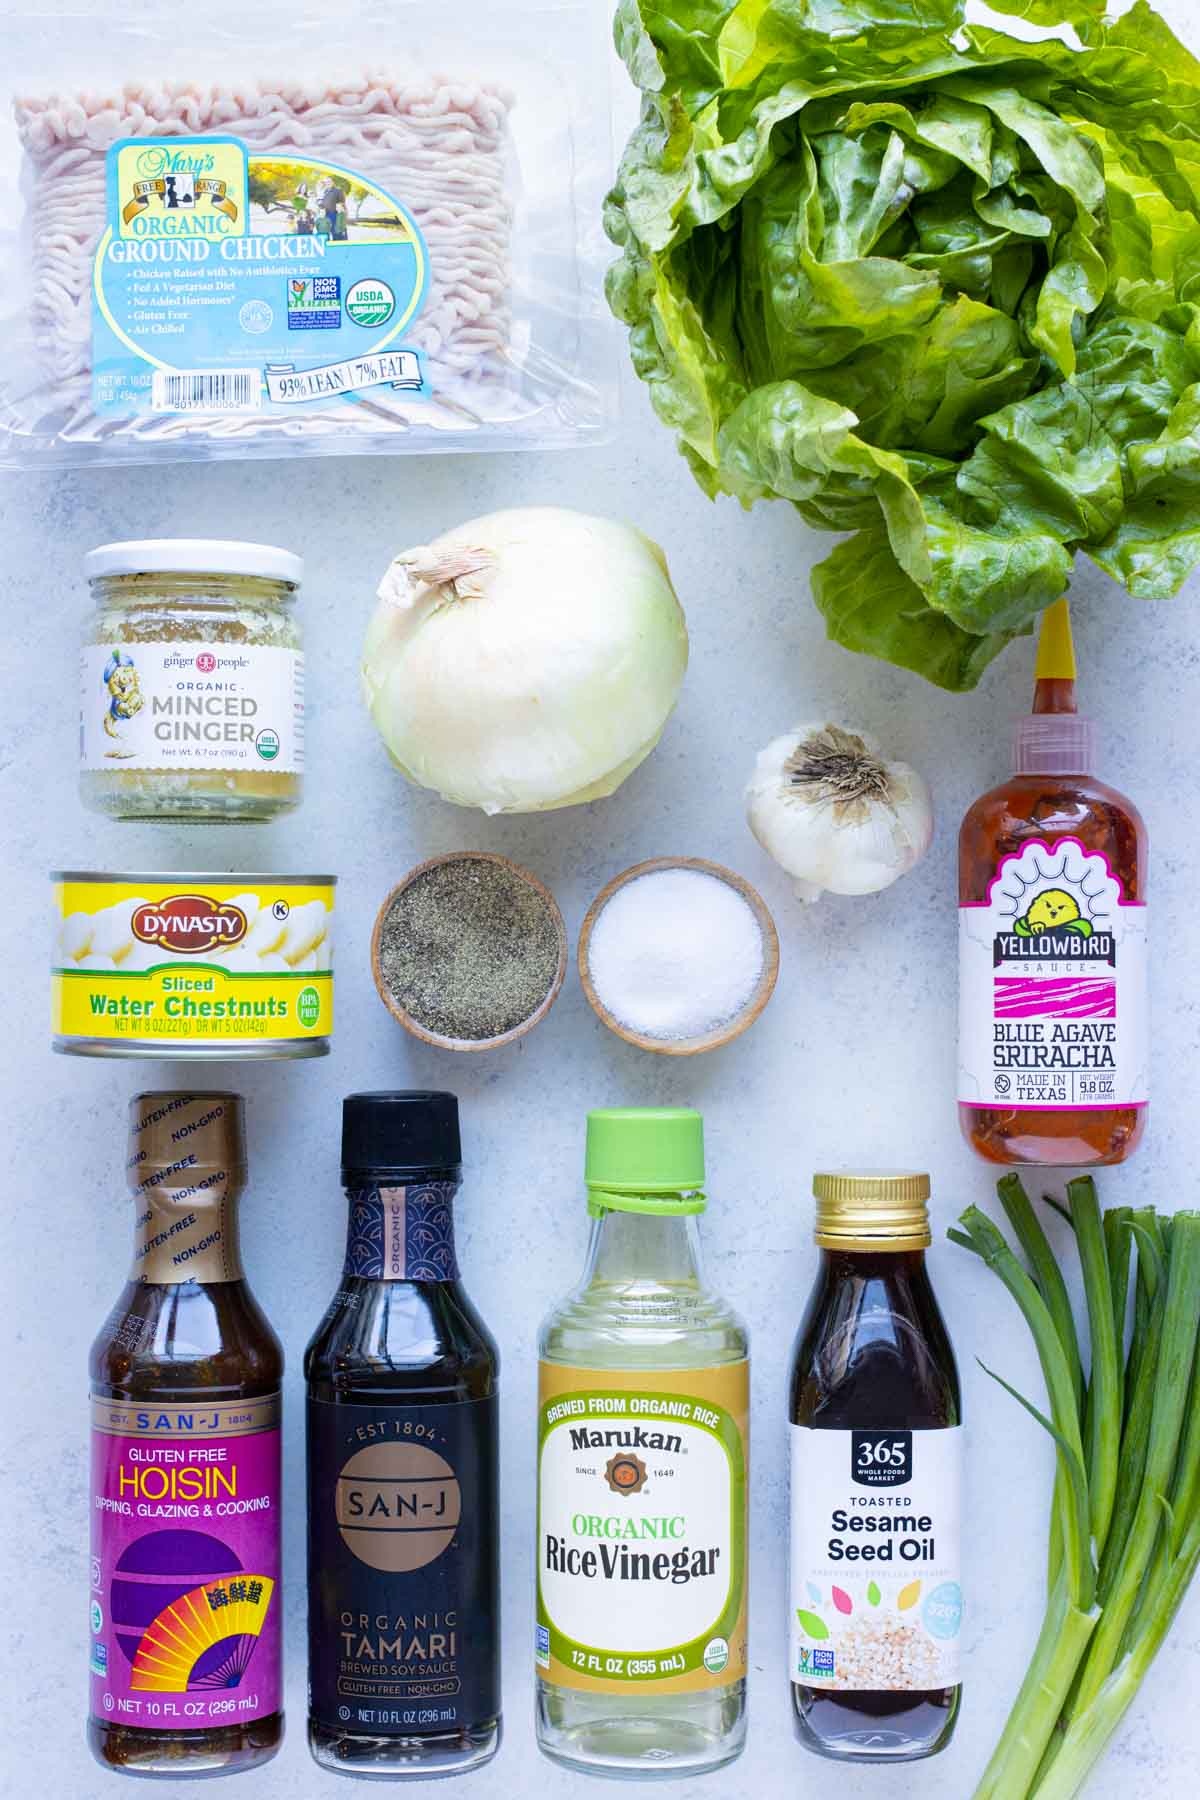 Ground chicken, onion, garlic, green onions, water chestnuts, soy sauce, hoisin sauce, and seasonings are the ingredients for this recipe.